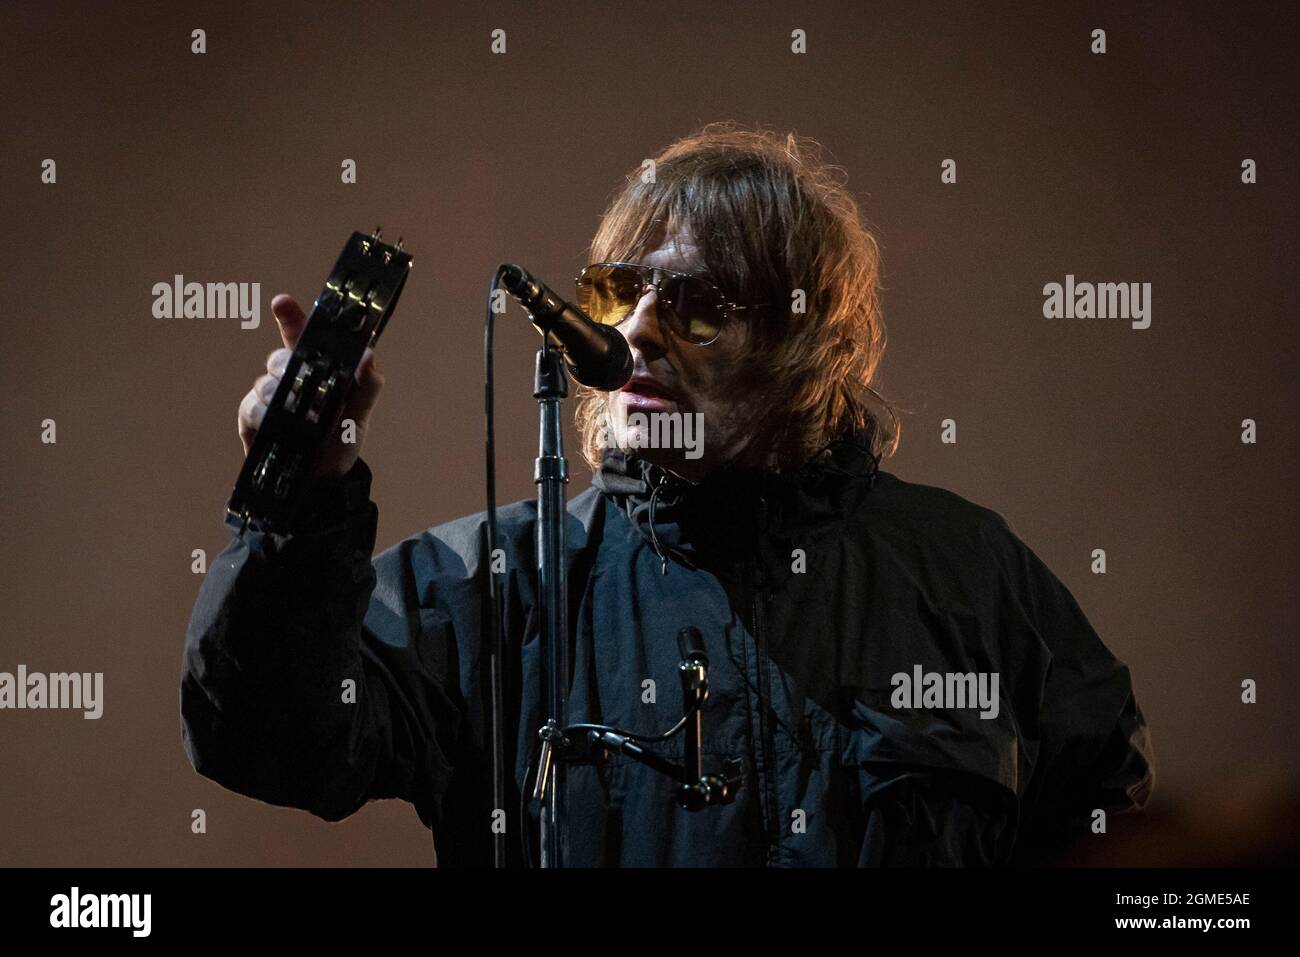 Newport, Isle of Wight, UK, Friday, 17th September 2021 Liam Gallagher performs live at the Isle of Wight festival Seaclose Park. Credit: DavidJensen / Empics Entertainment / Alamy Live News Stock Photo